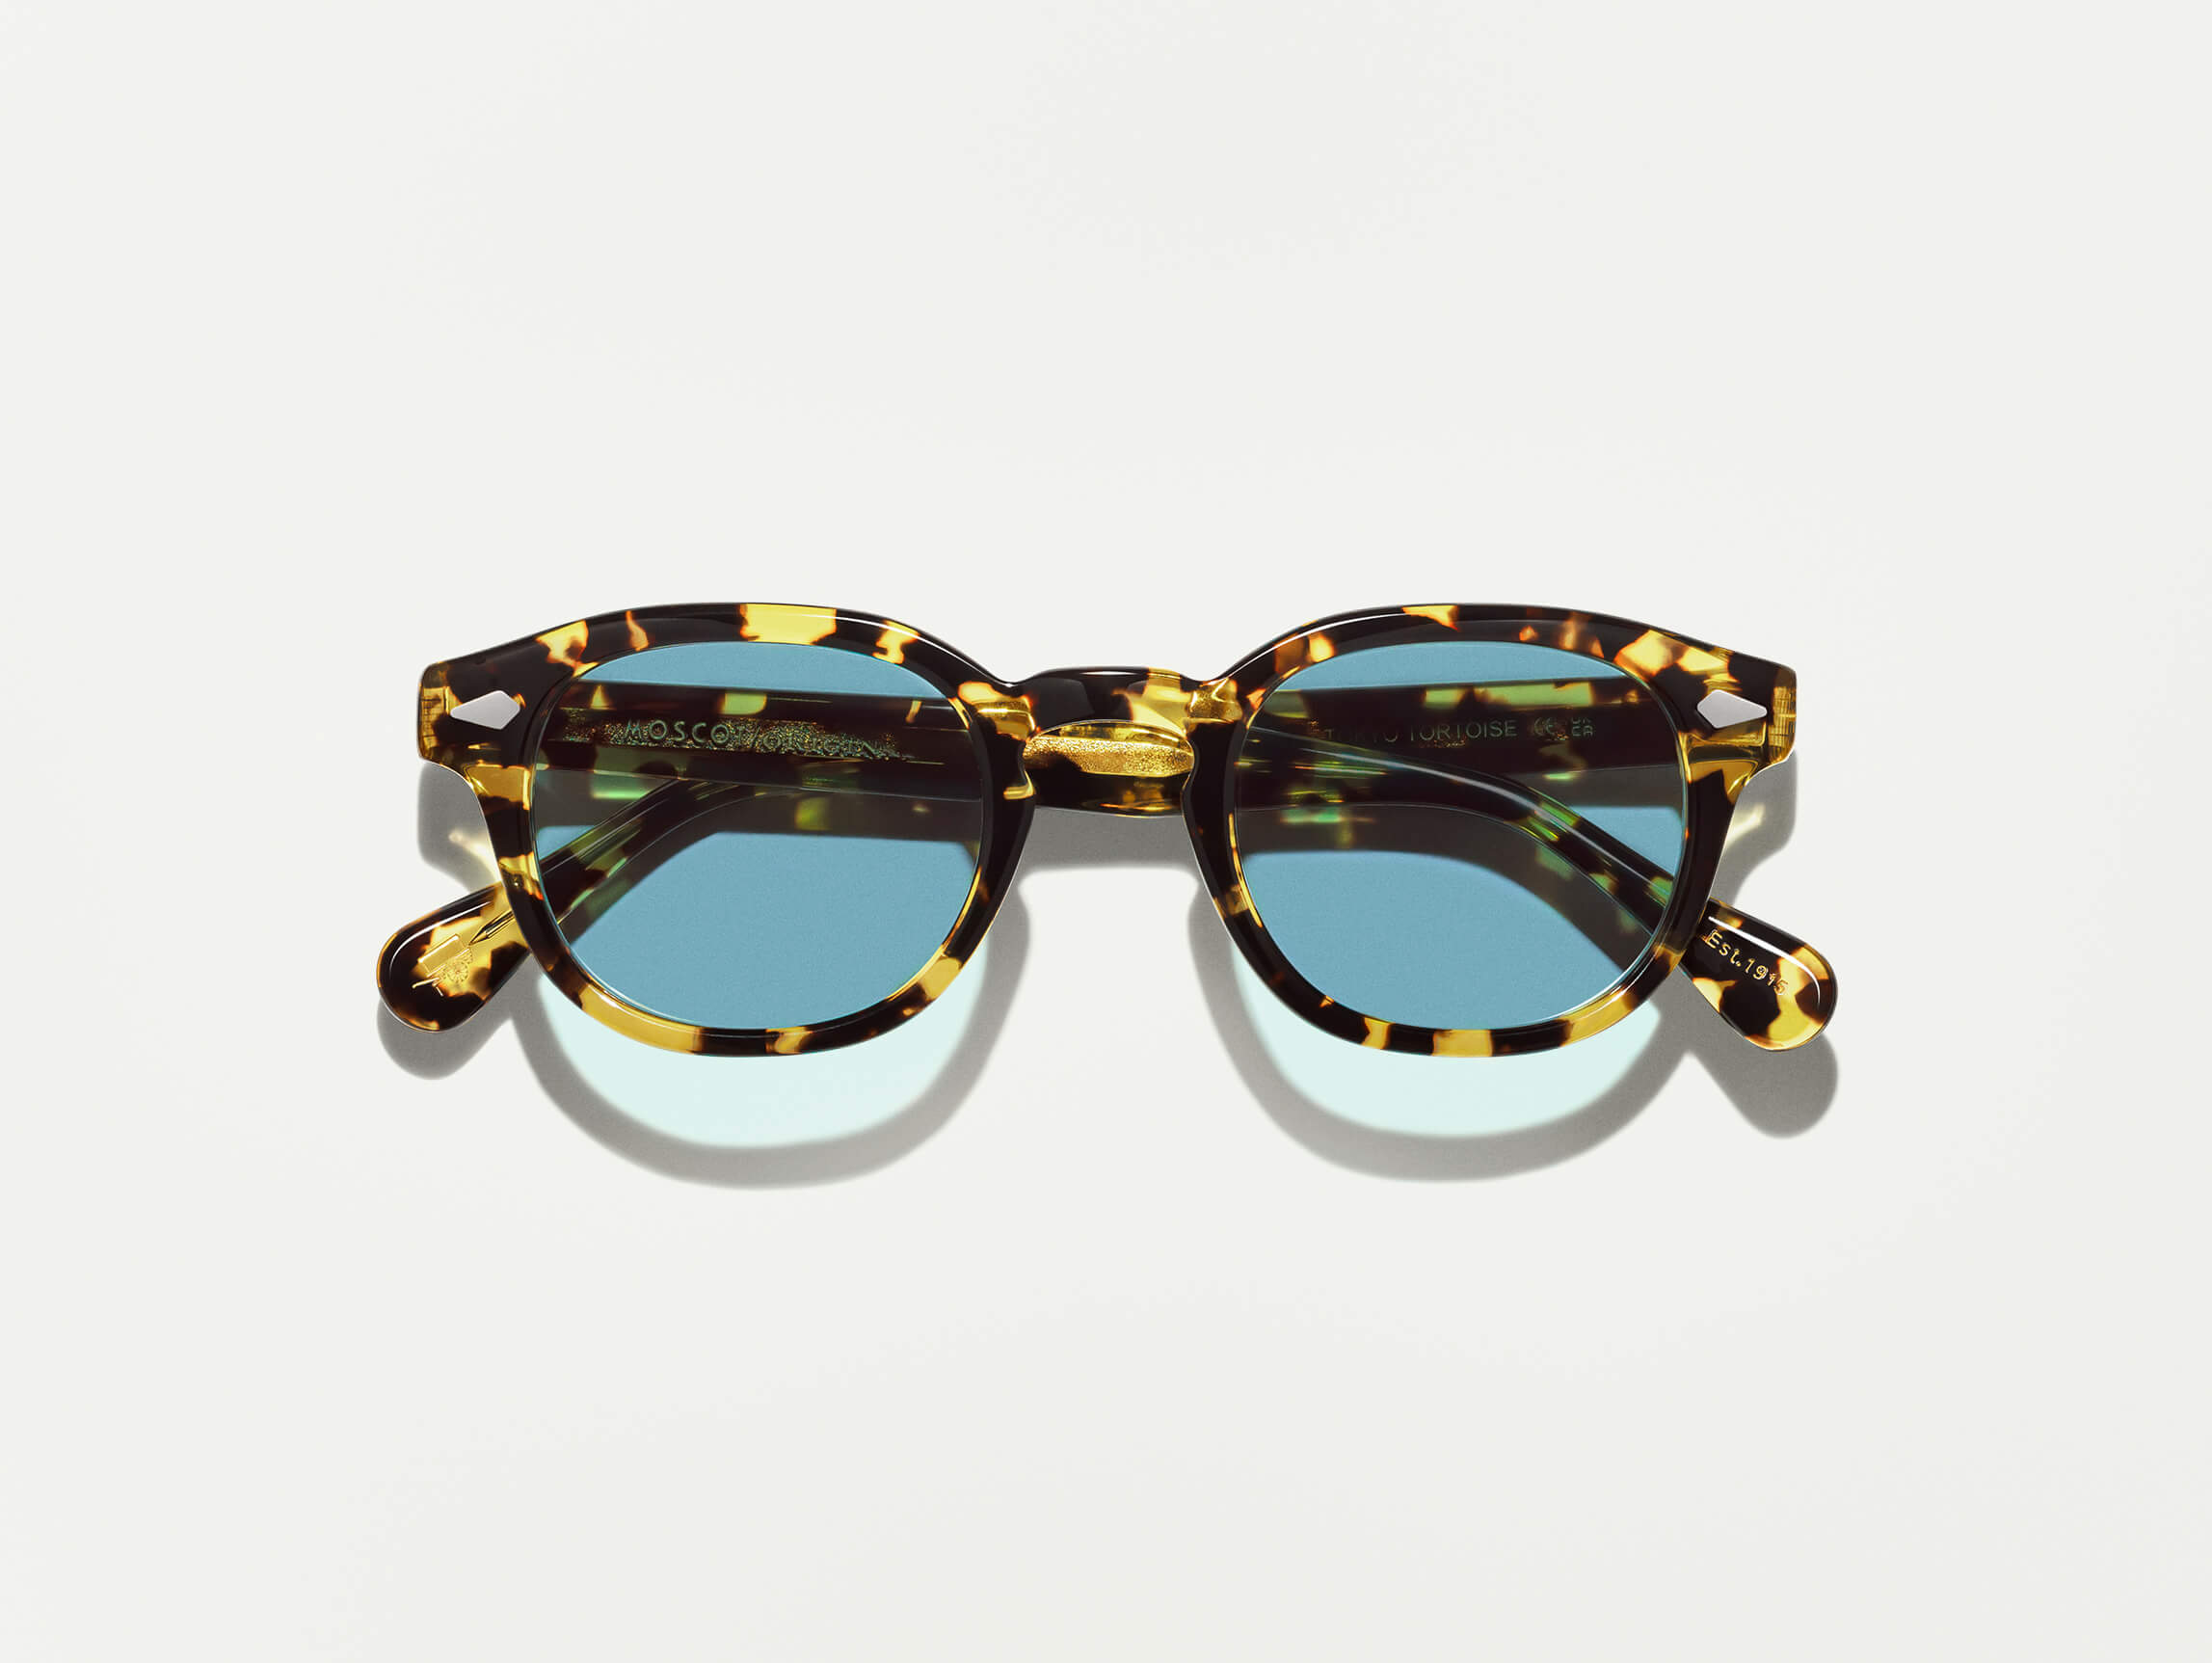 #color_tokyo tortoise | The LEMTOSH SUN in Tokyo Tortoise with Mineral Blue Glass Lenses